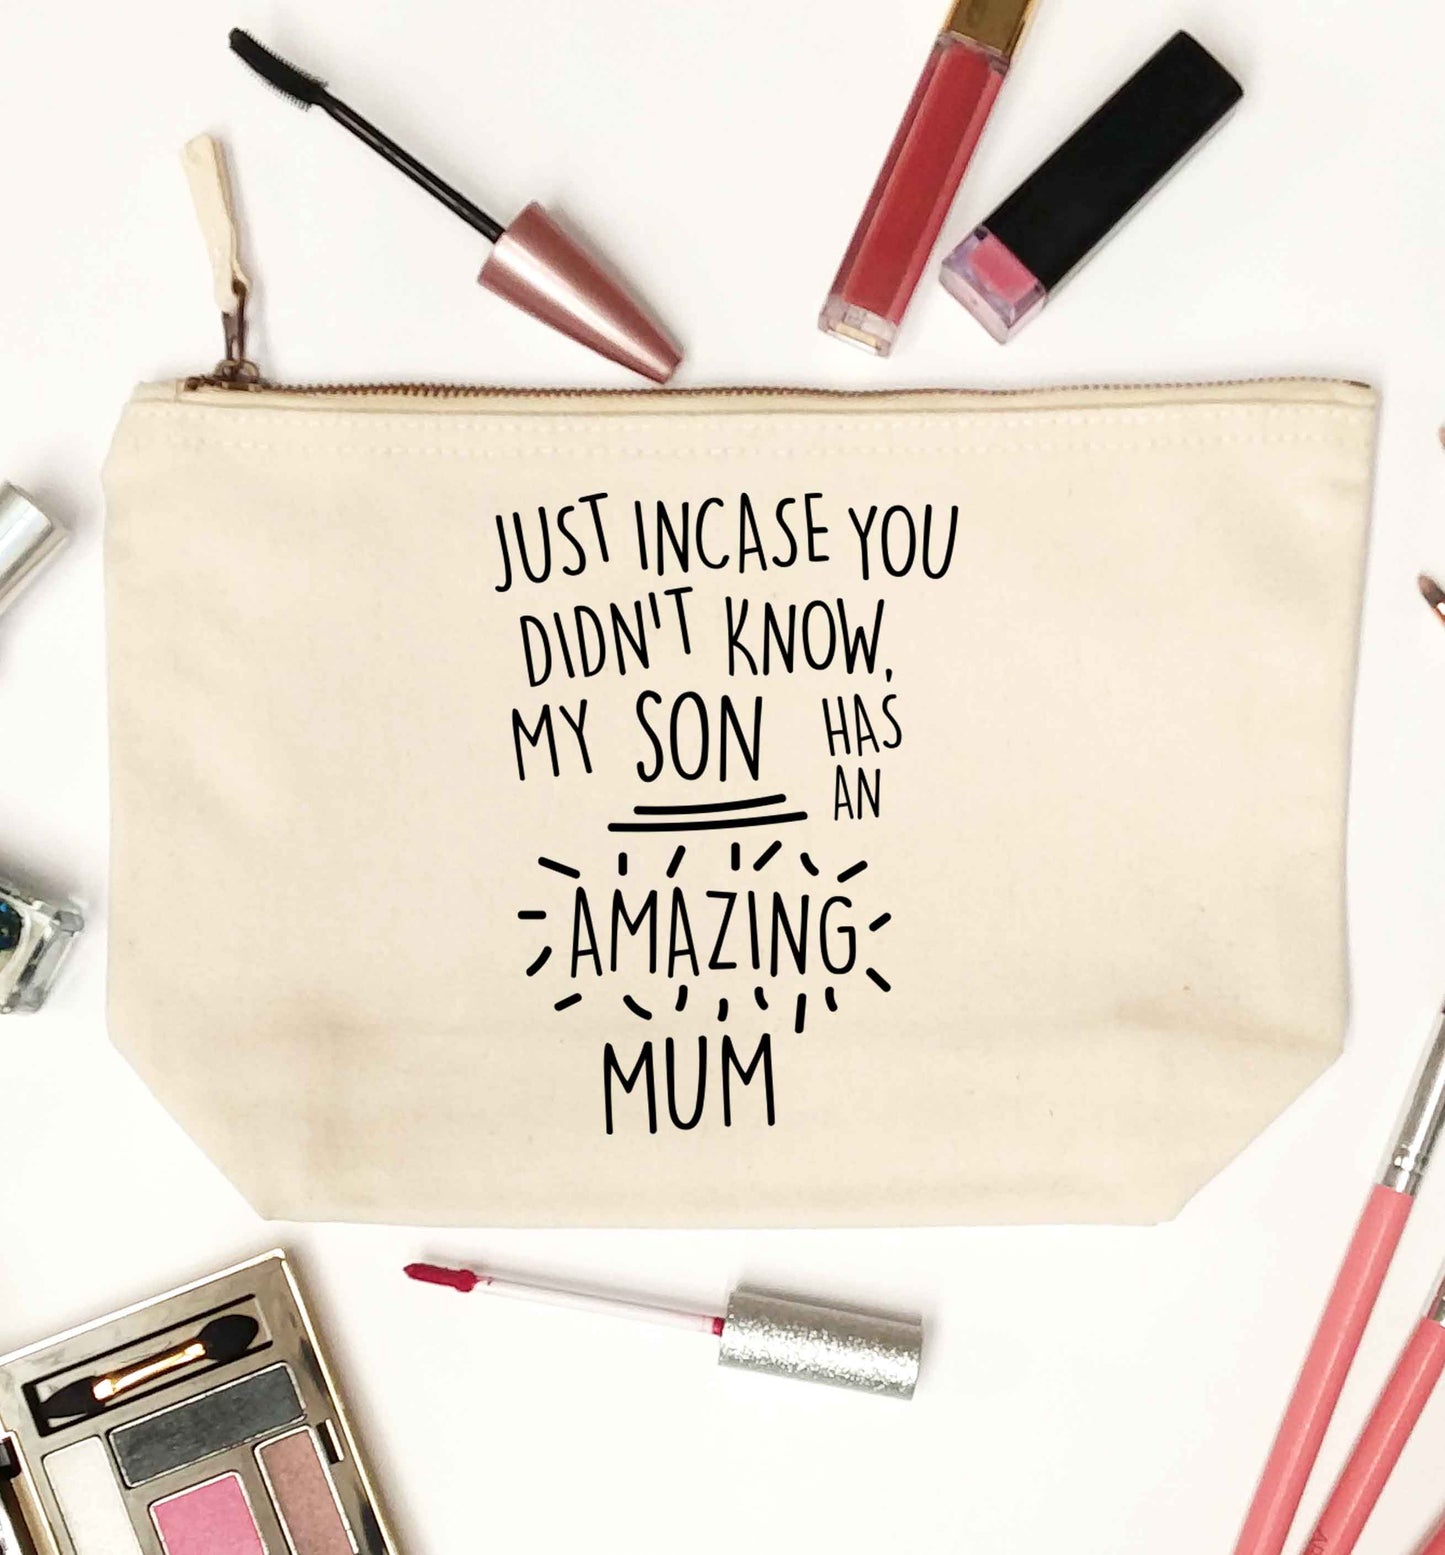 Just incase you didn't know my son has an amazing mum natural makeup bag